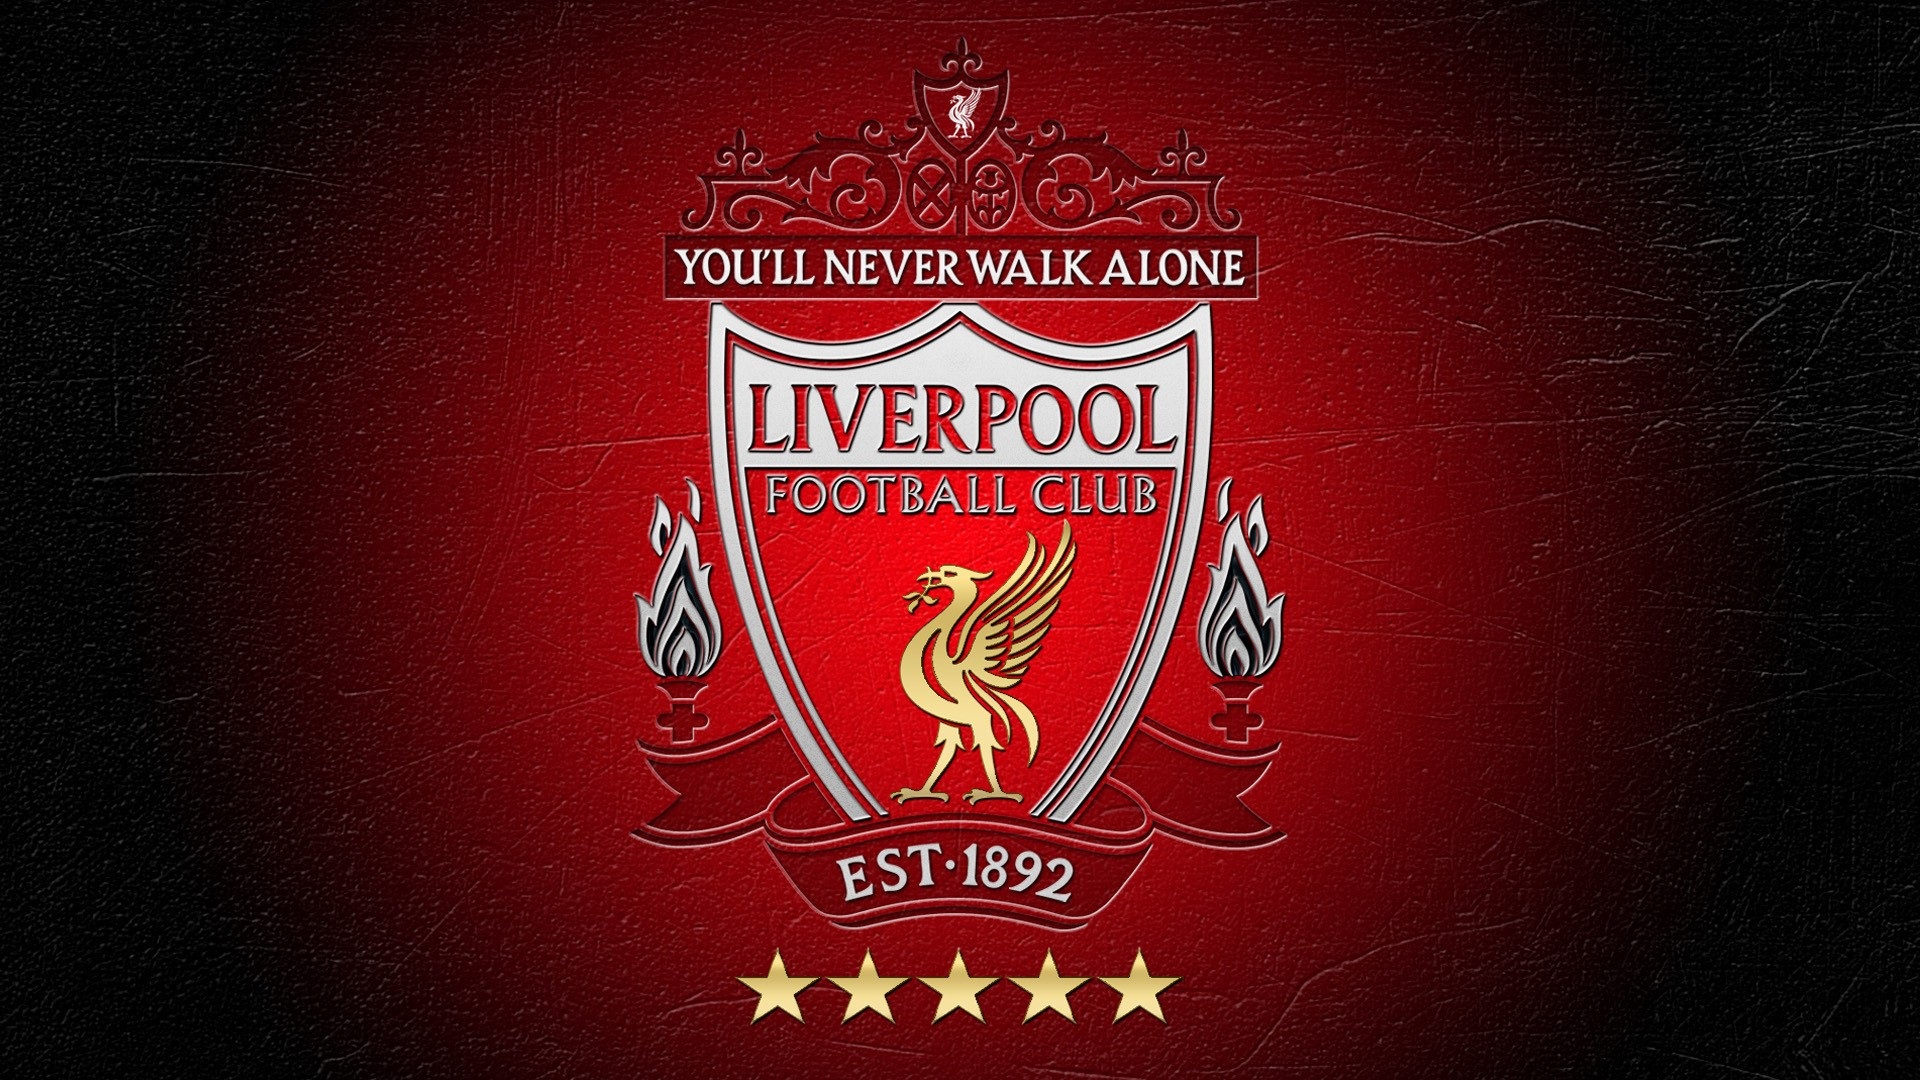 Liverpool Desktop Wallpapers with resolution 1920x1080 pixel. You can make this wallpaper for your Mac or Windows Desktop Background, iPhone, Android or Tablet and another Smartphone device